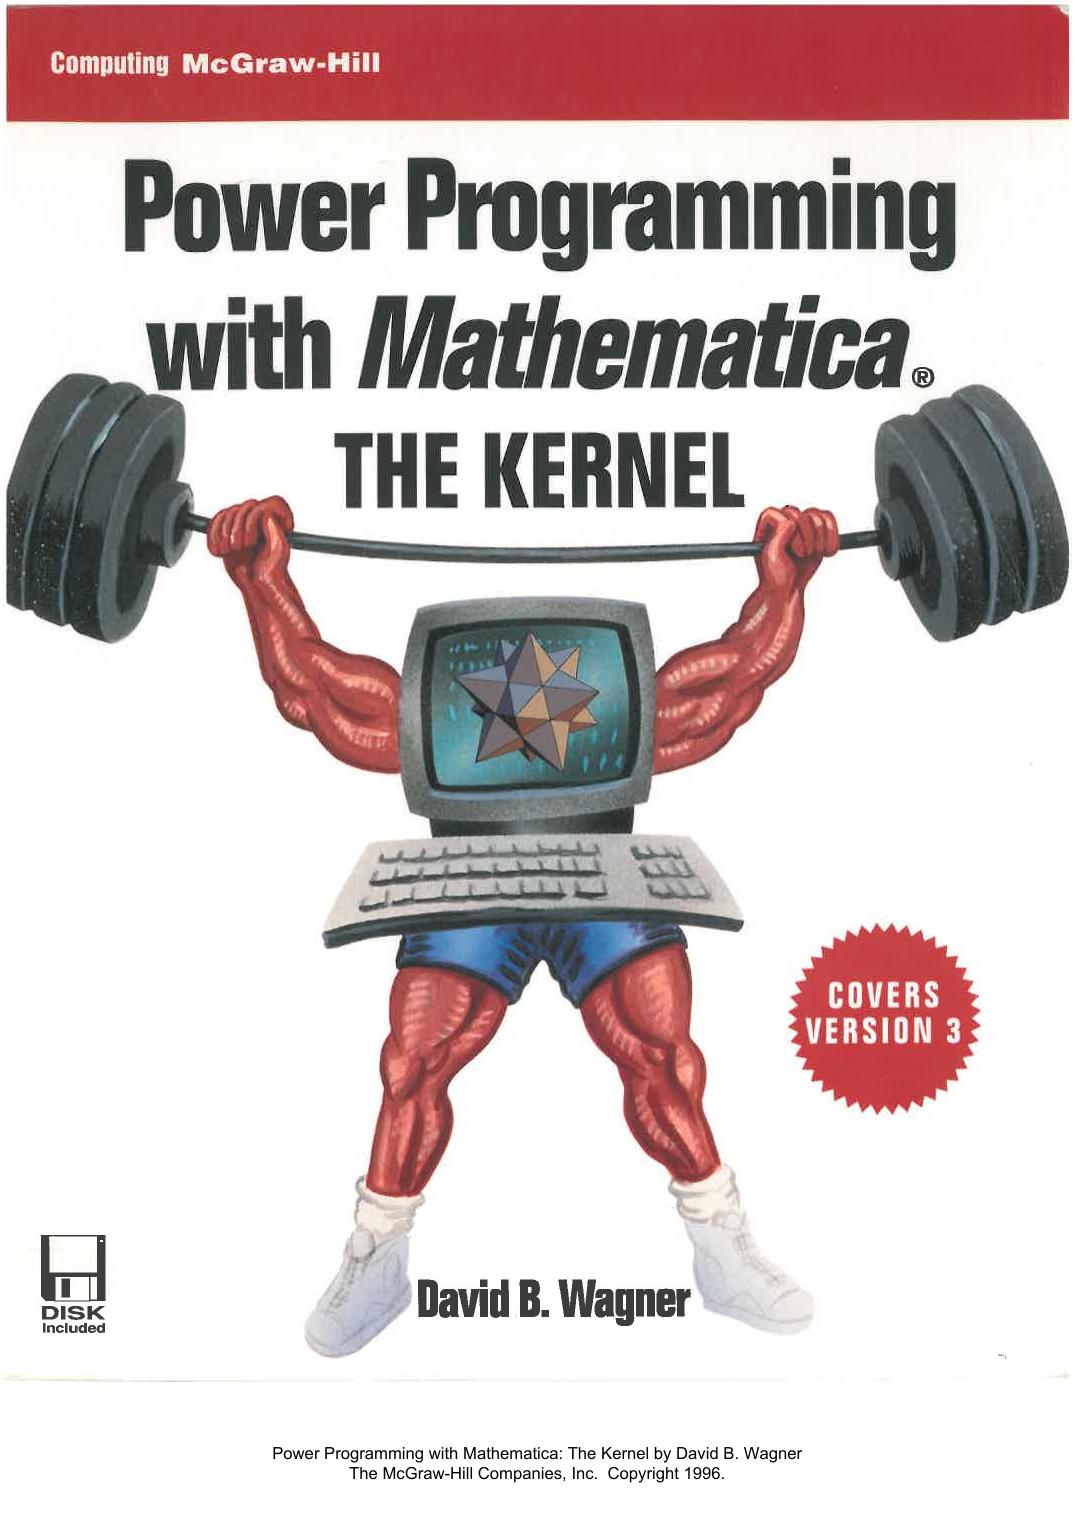 Power Programming with Mathematica®: The Kernel